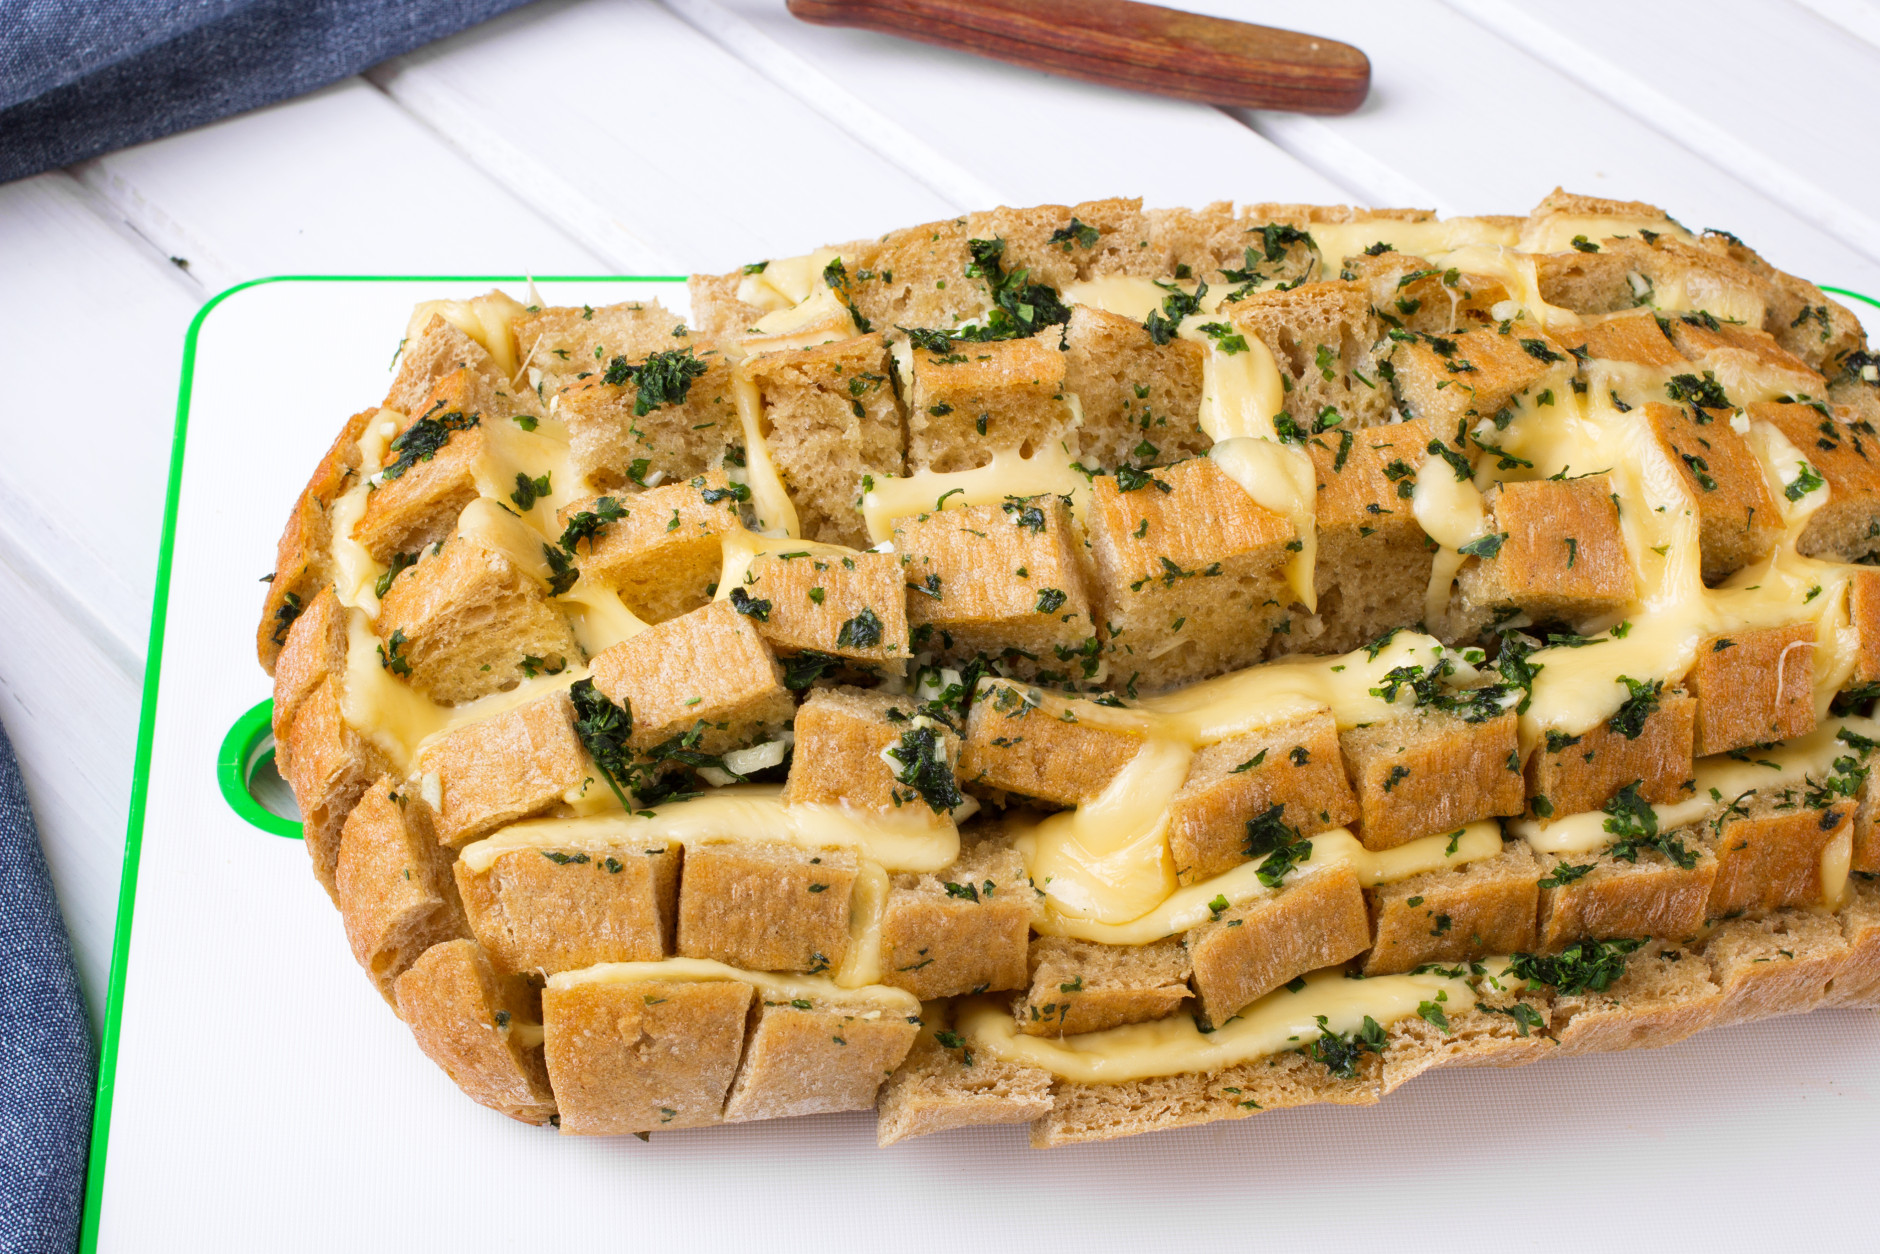 Stuffed bread with cheese; garlic and parsley